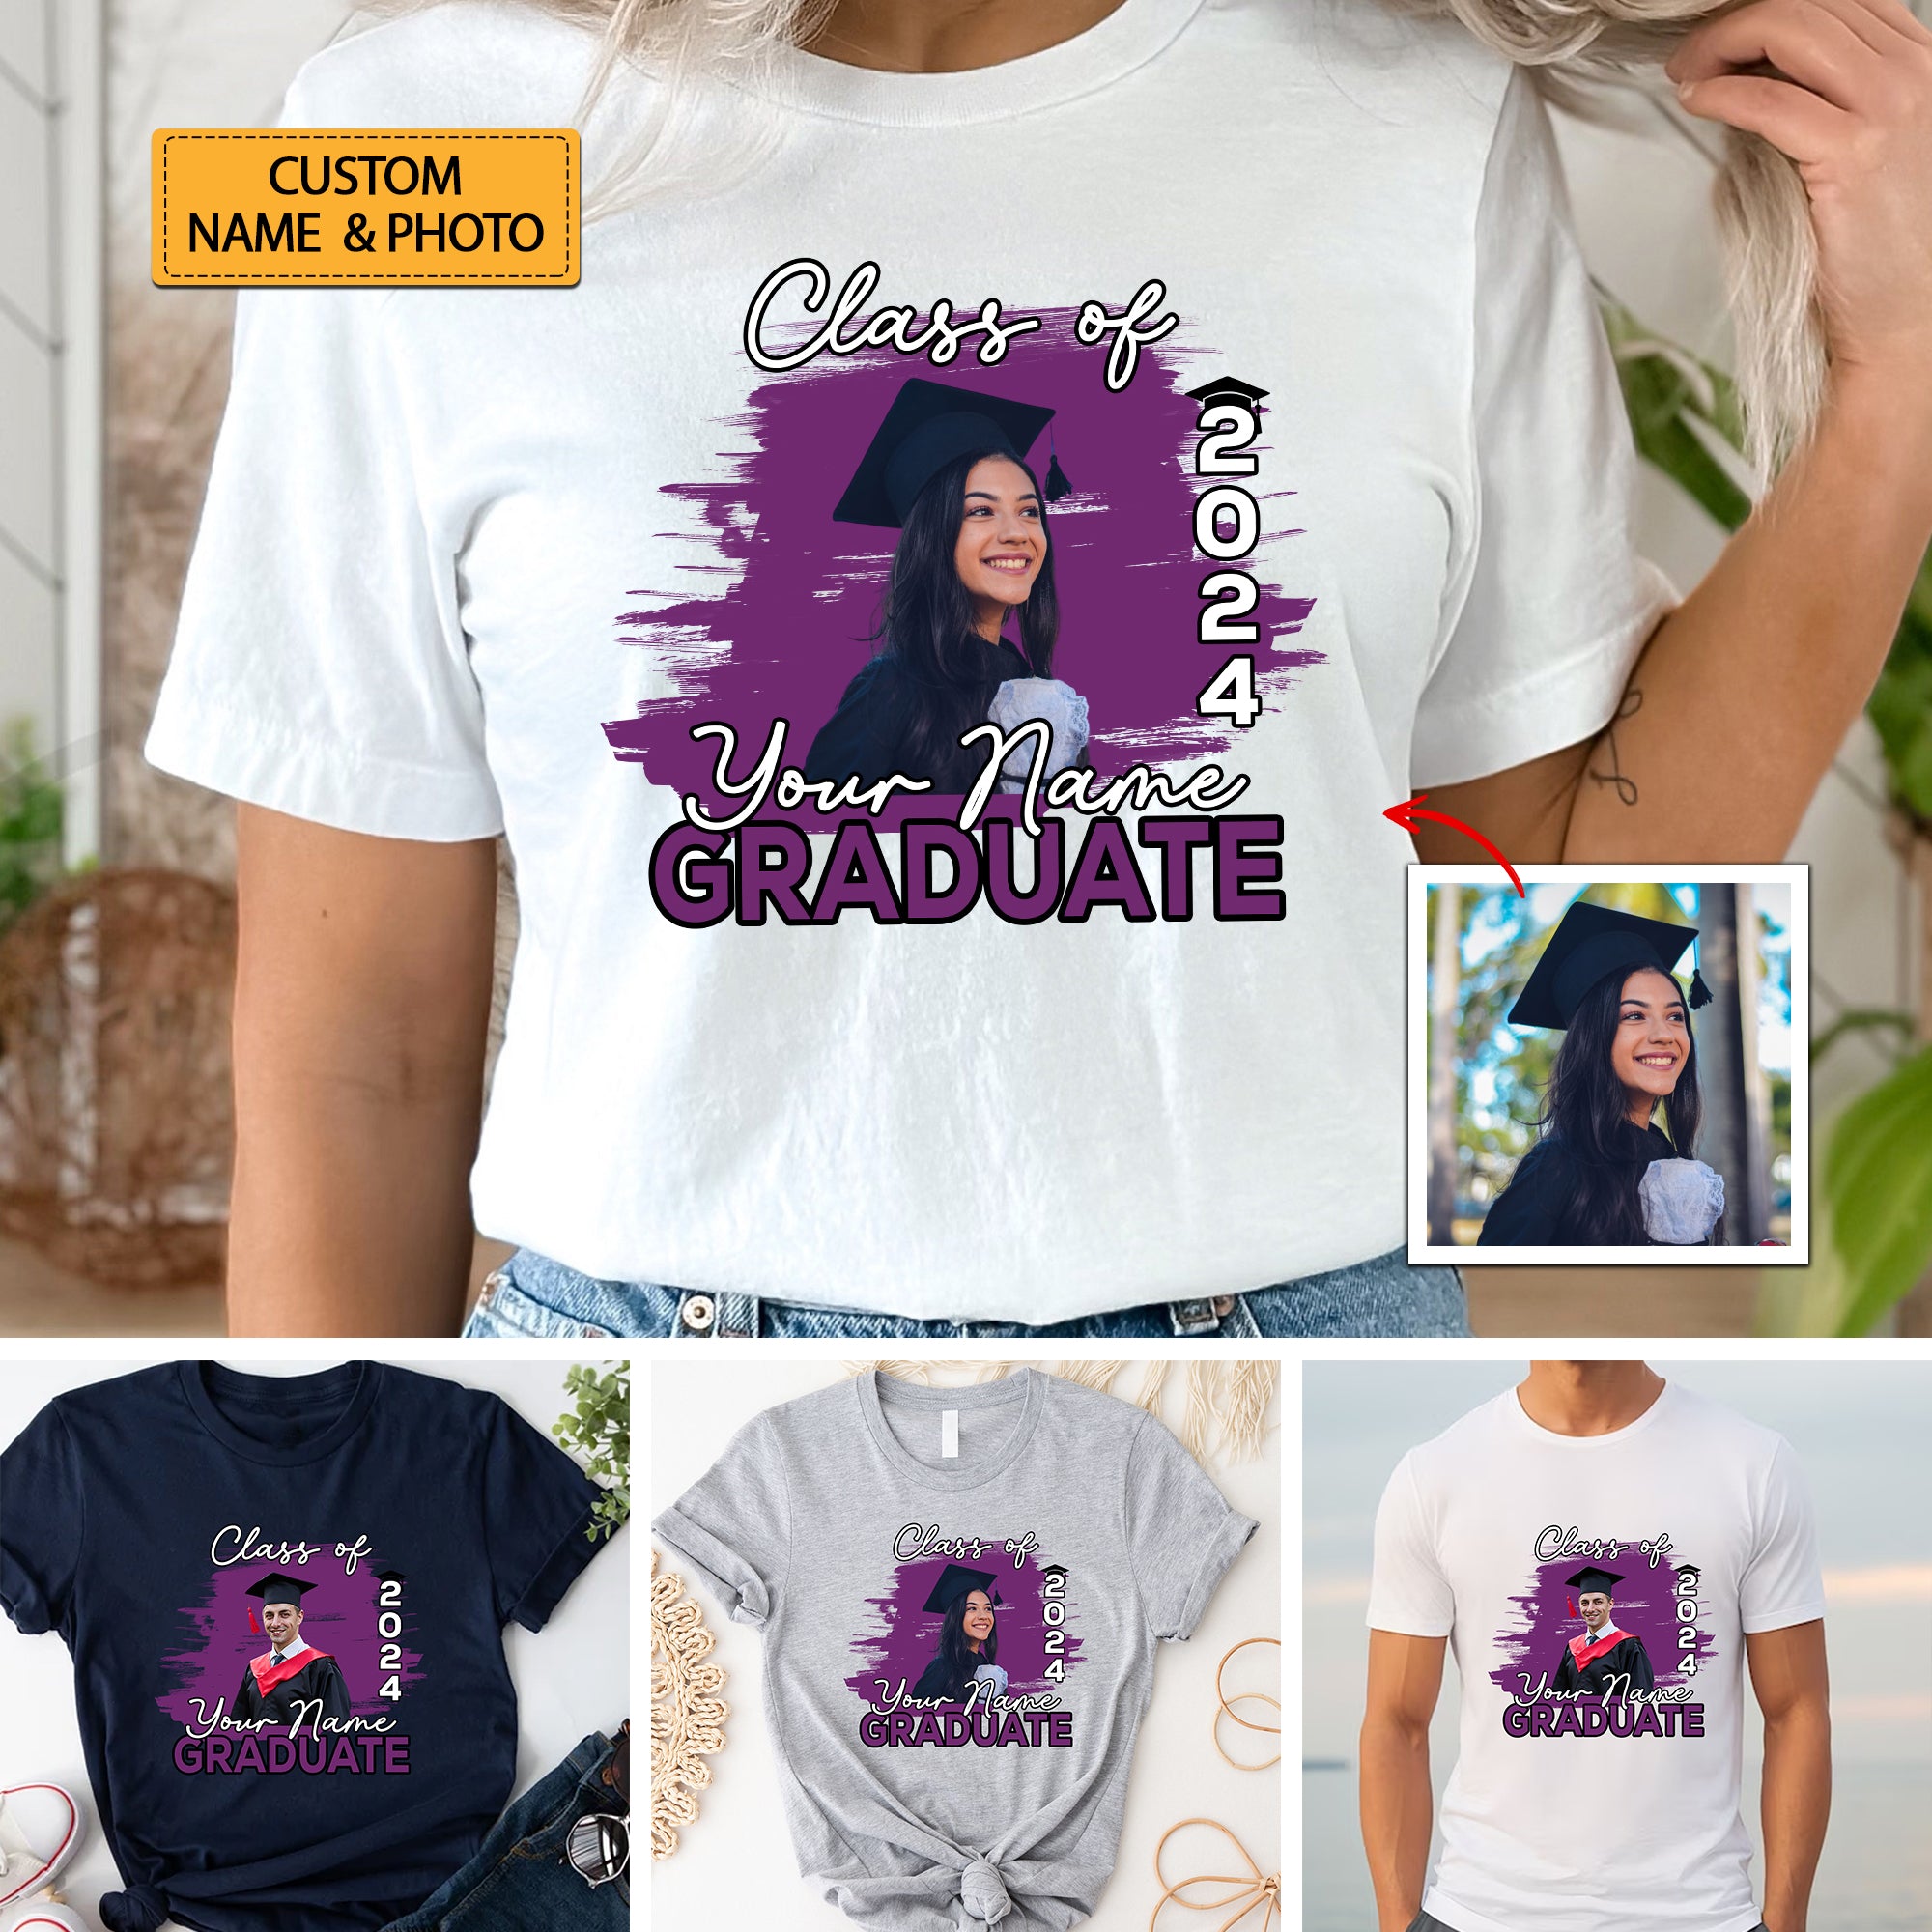 Class Of 2024 Graduate, Custom Photo And Name - Gift For Graduation - Personalized T-Shirt